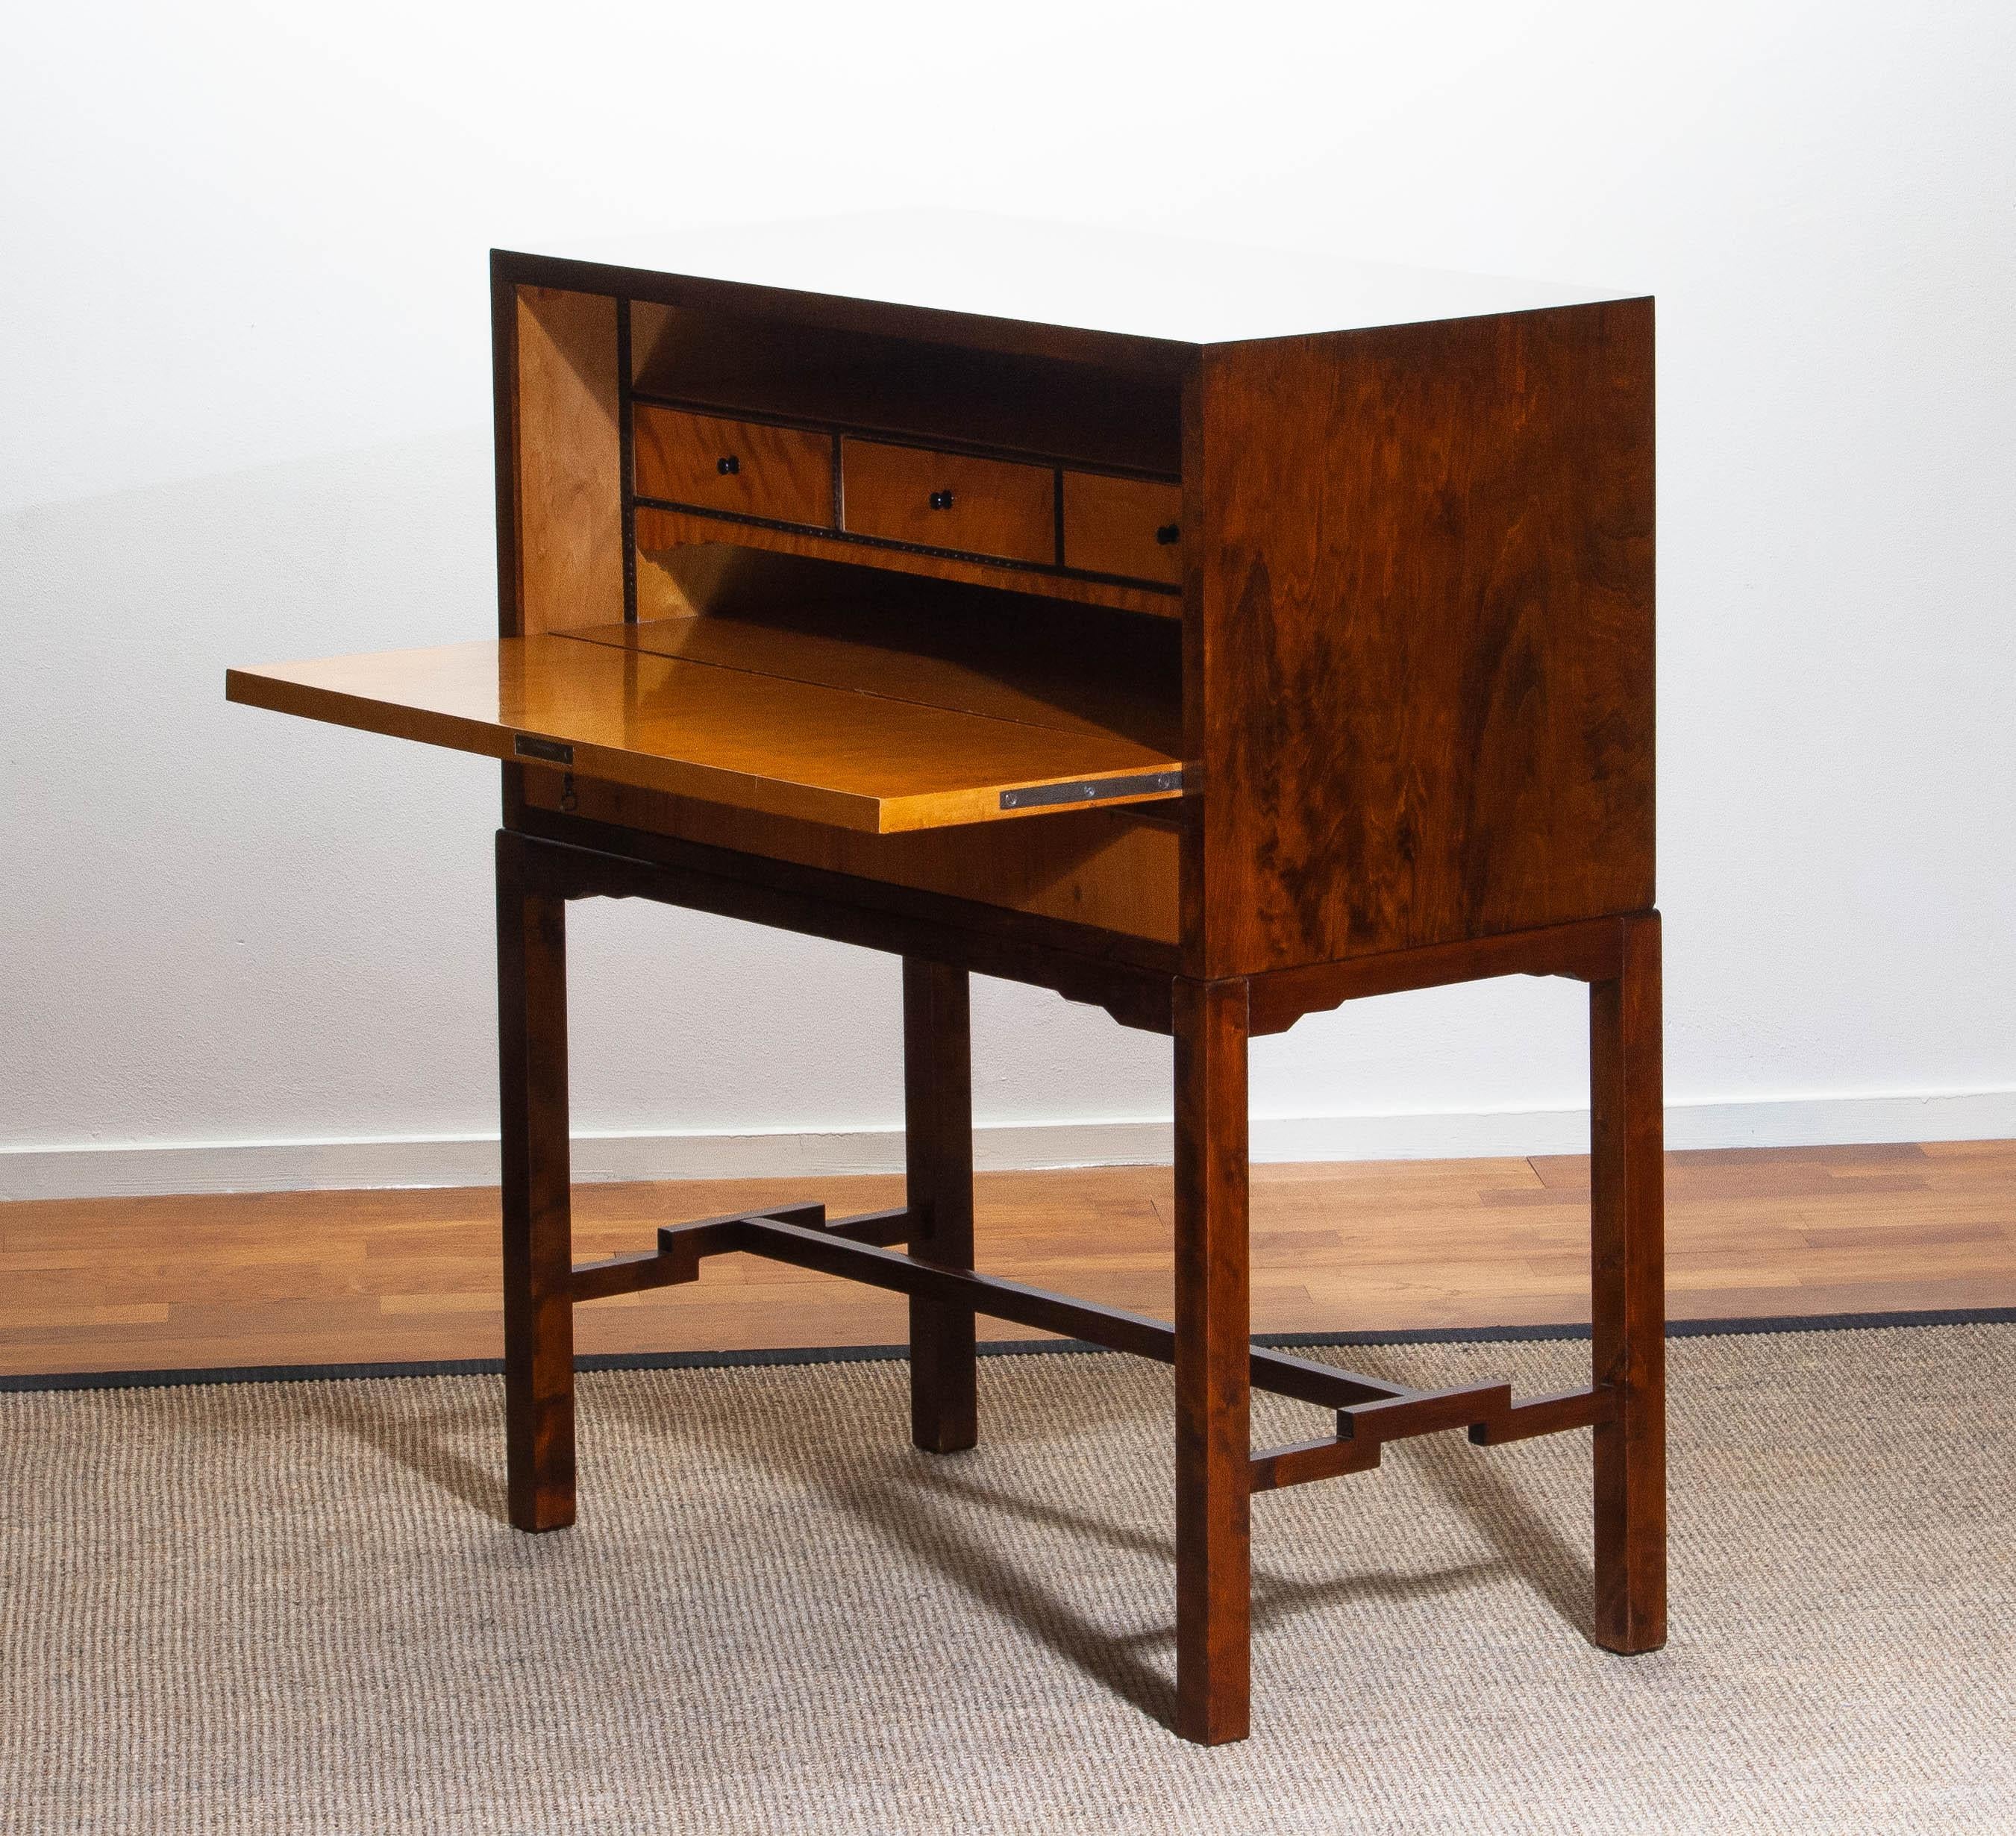 Extremely luxury and high quality secretaire from the 1930s made by Nordiska Kompaniet Stockholm in walnut, elm, birch and mahogany.
Secretaire and front drawer both open / lock with the same key. Secretaire and front drawer are veneered in open